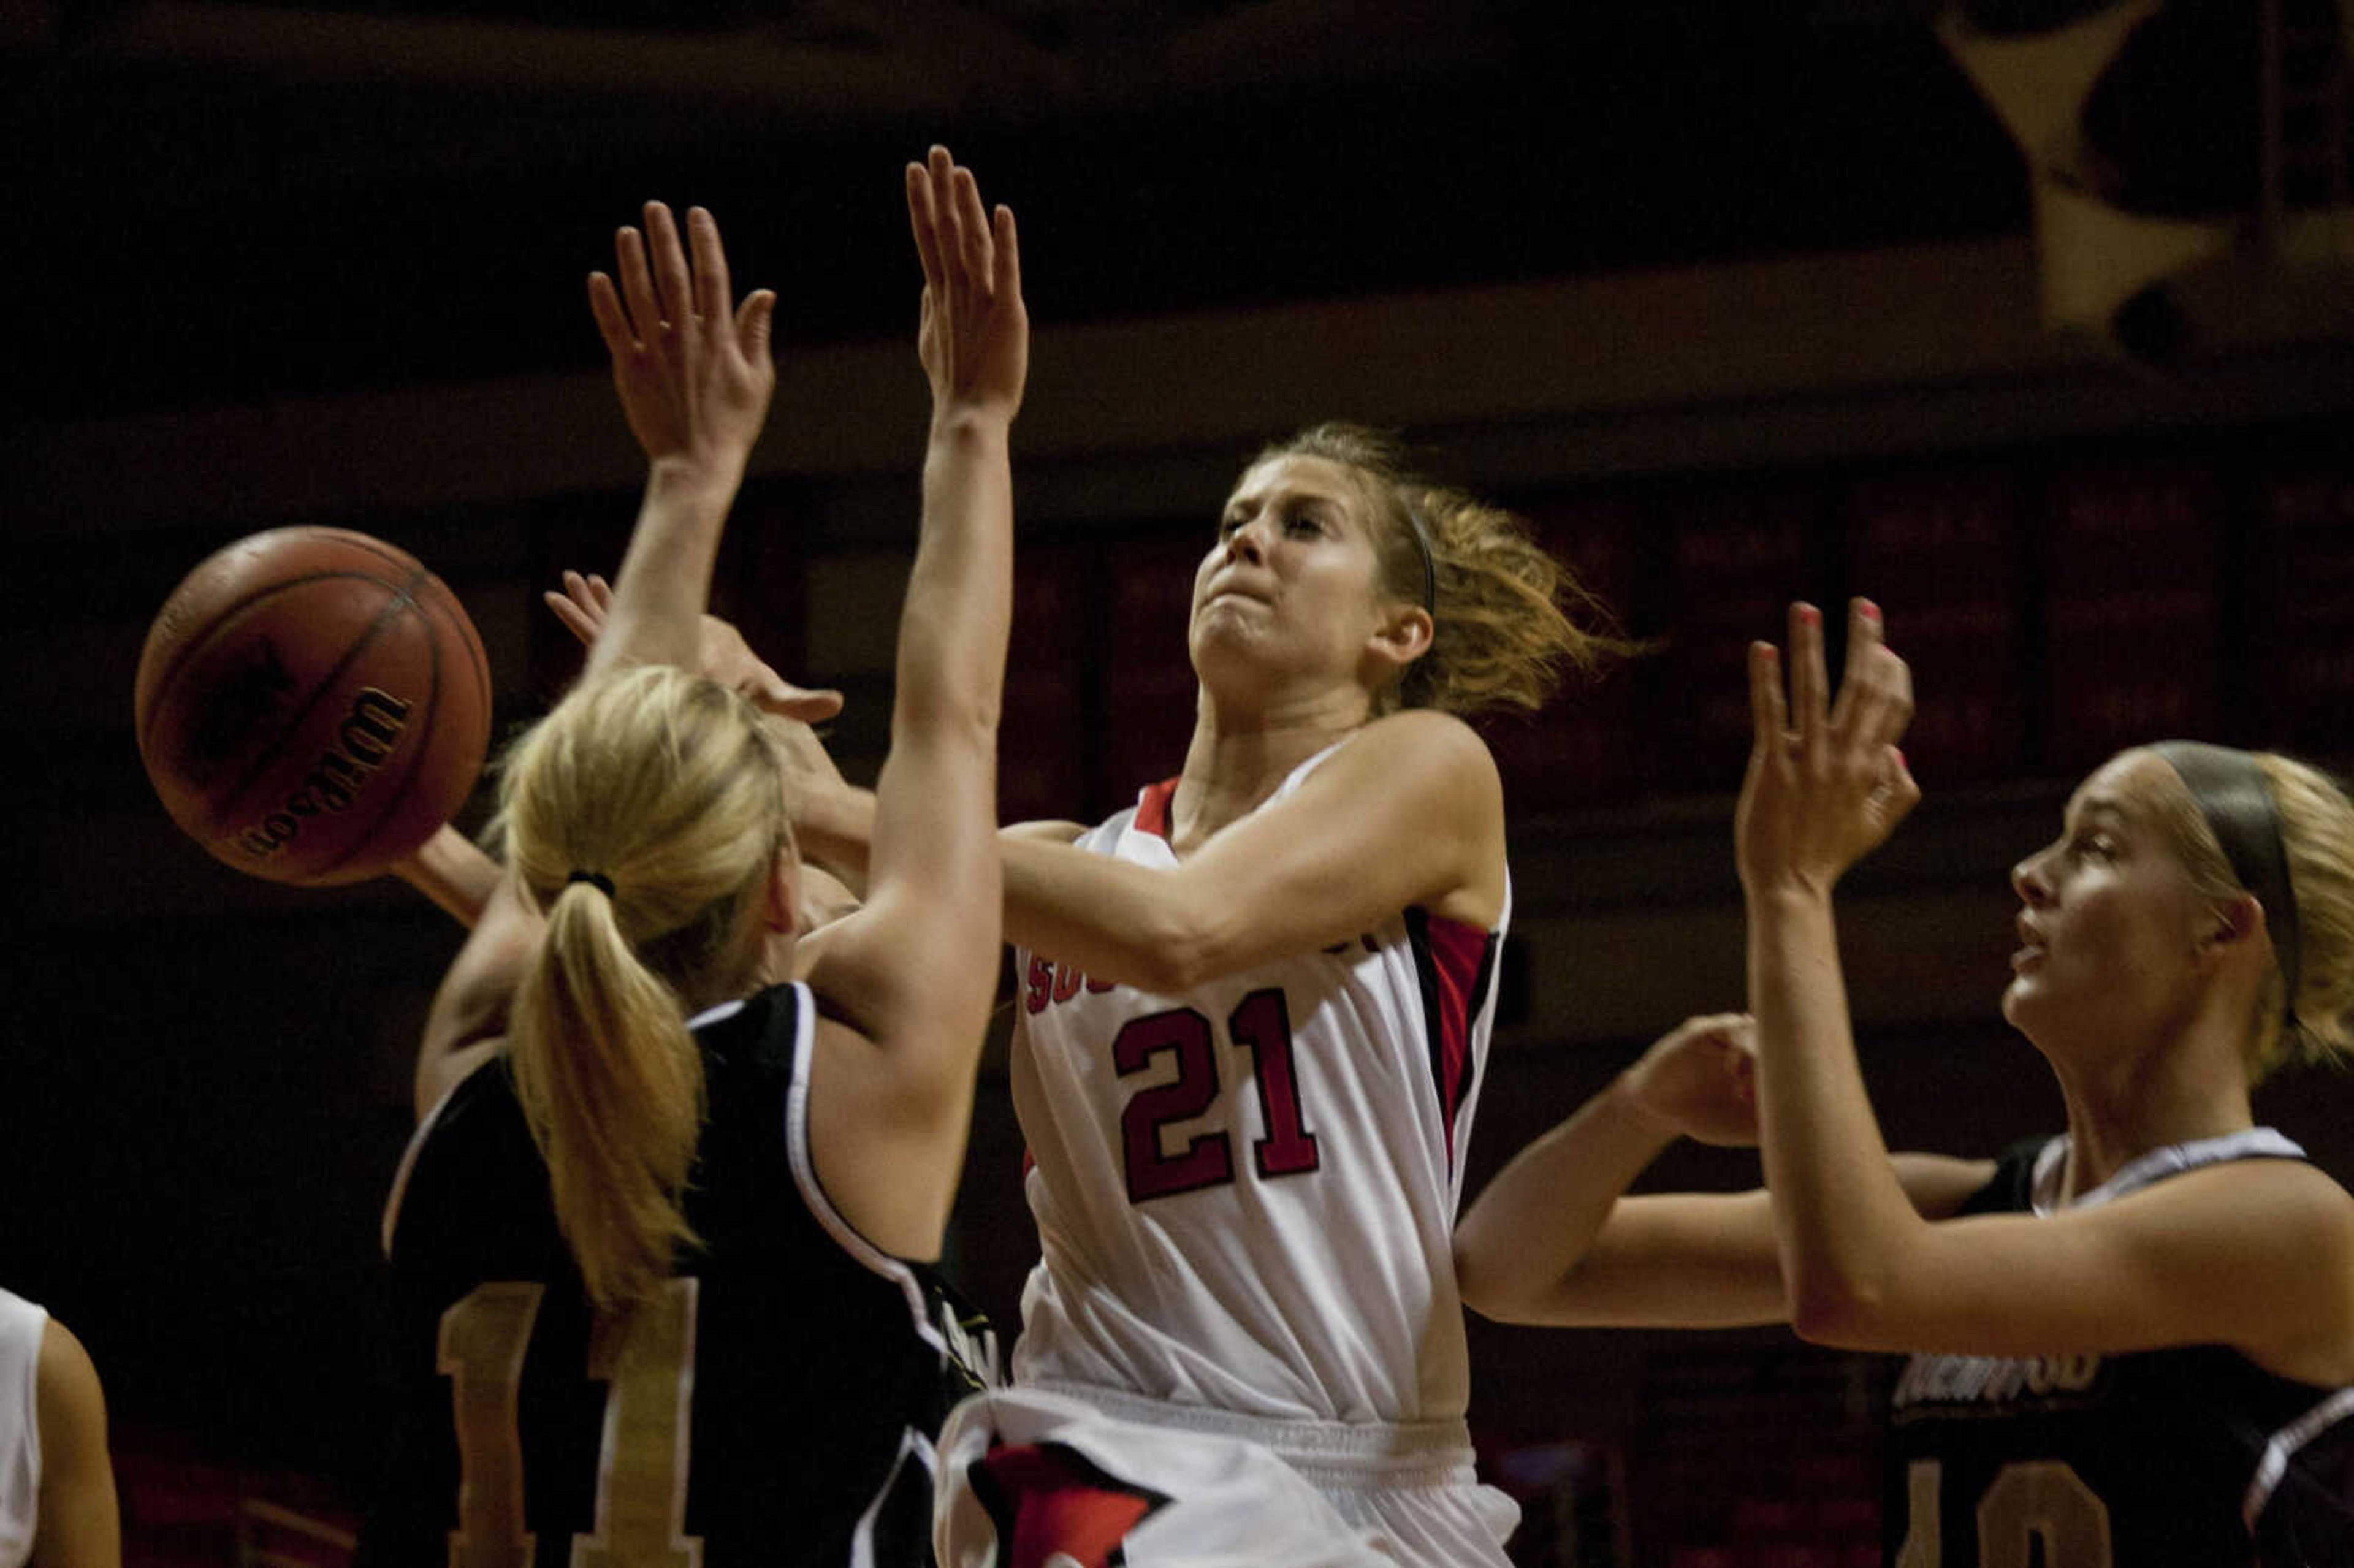 Senior guard Karley Evans scored 15 points in Southeast's 66-56 win against Lindenwood. - Photo by Nathan Hamilton